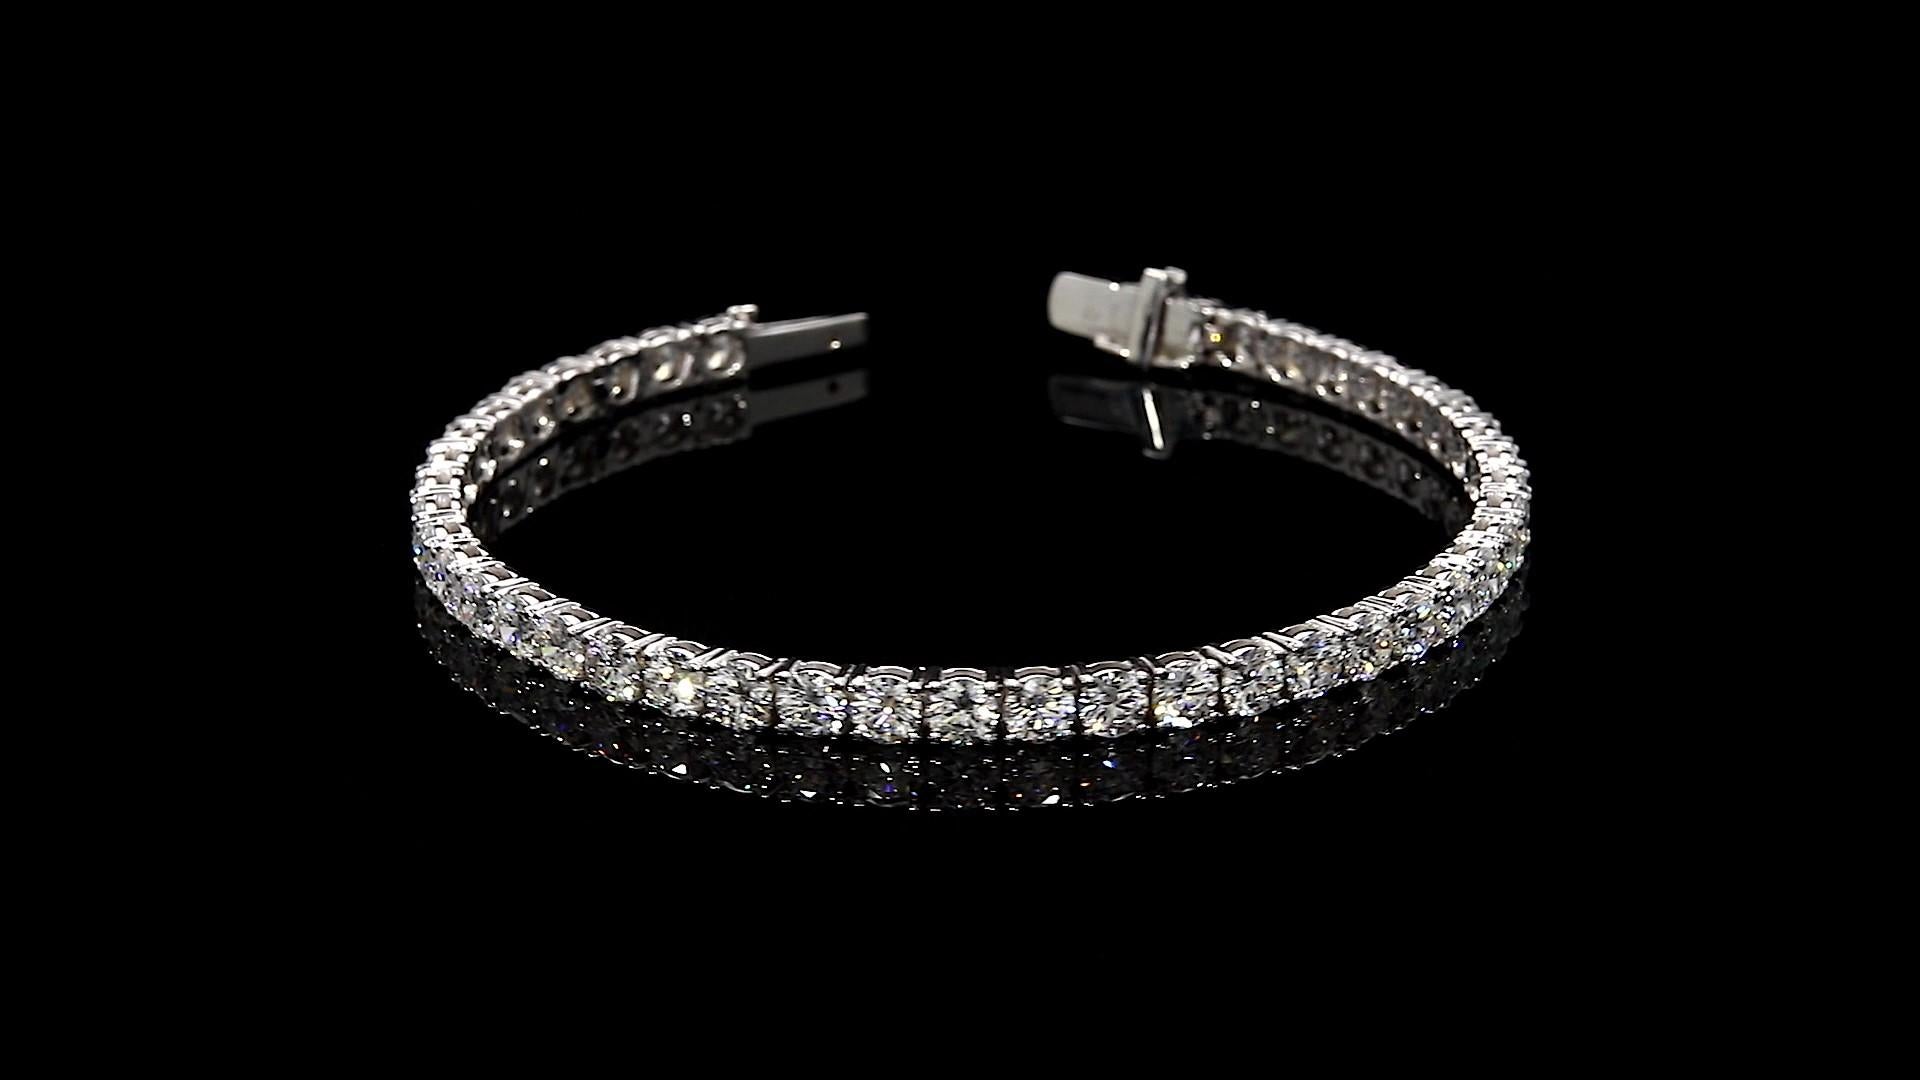 Diamond Tennis Bracelet 4.93 Total Carat Weight 18K White Gold

With Round Diamonds, 0.08 Carats Each 

Diamonds are DEF in Color and VS2 in Clarity

Total Carat Weight is 4.39 Carats 

4-Prong Setting

Length: 7.0 inches

Set in 18 Karat White